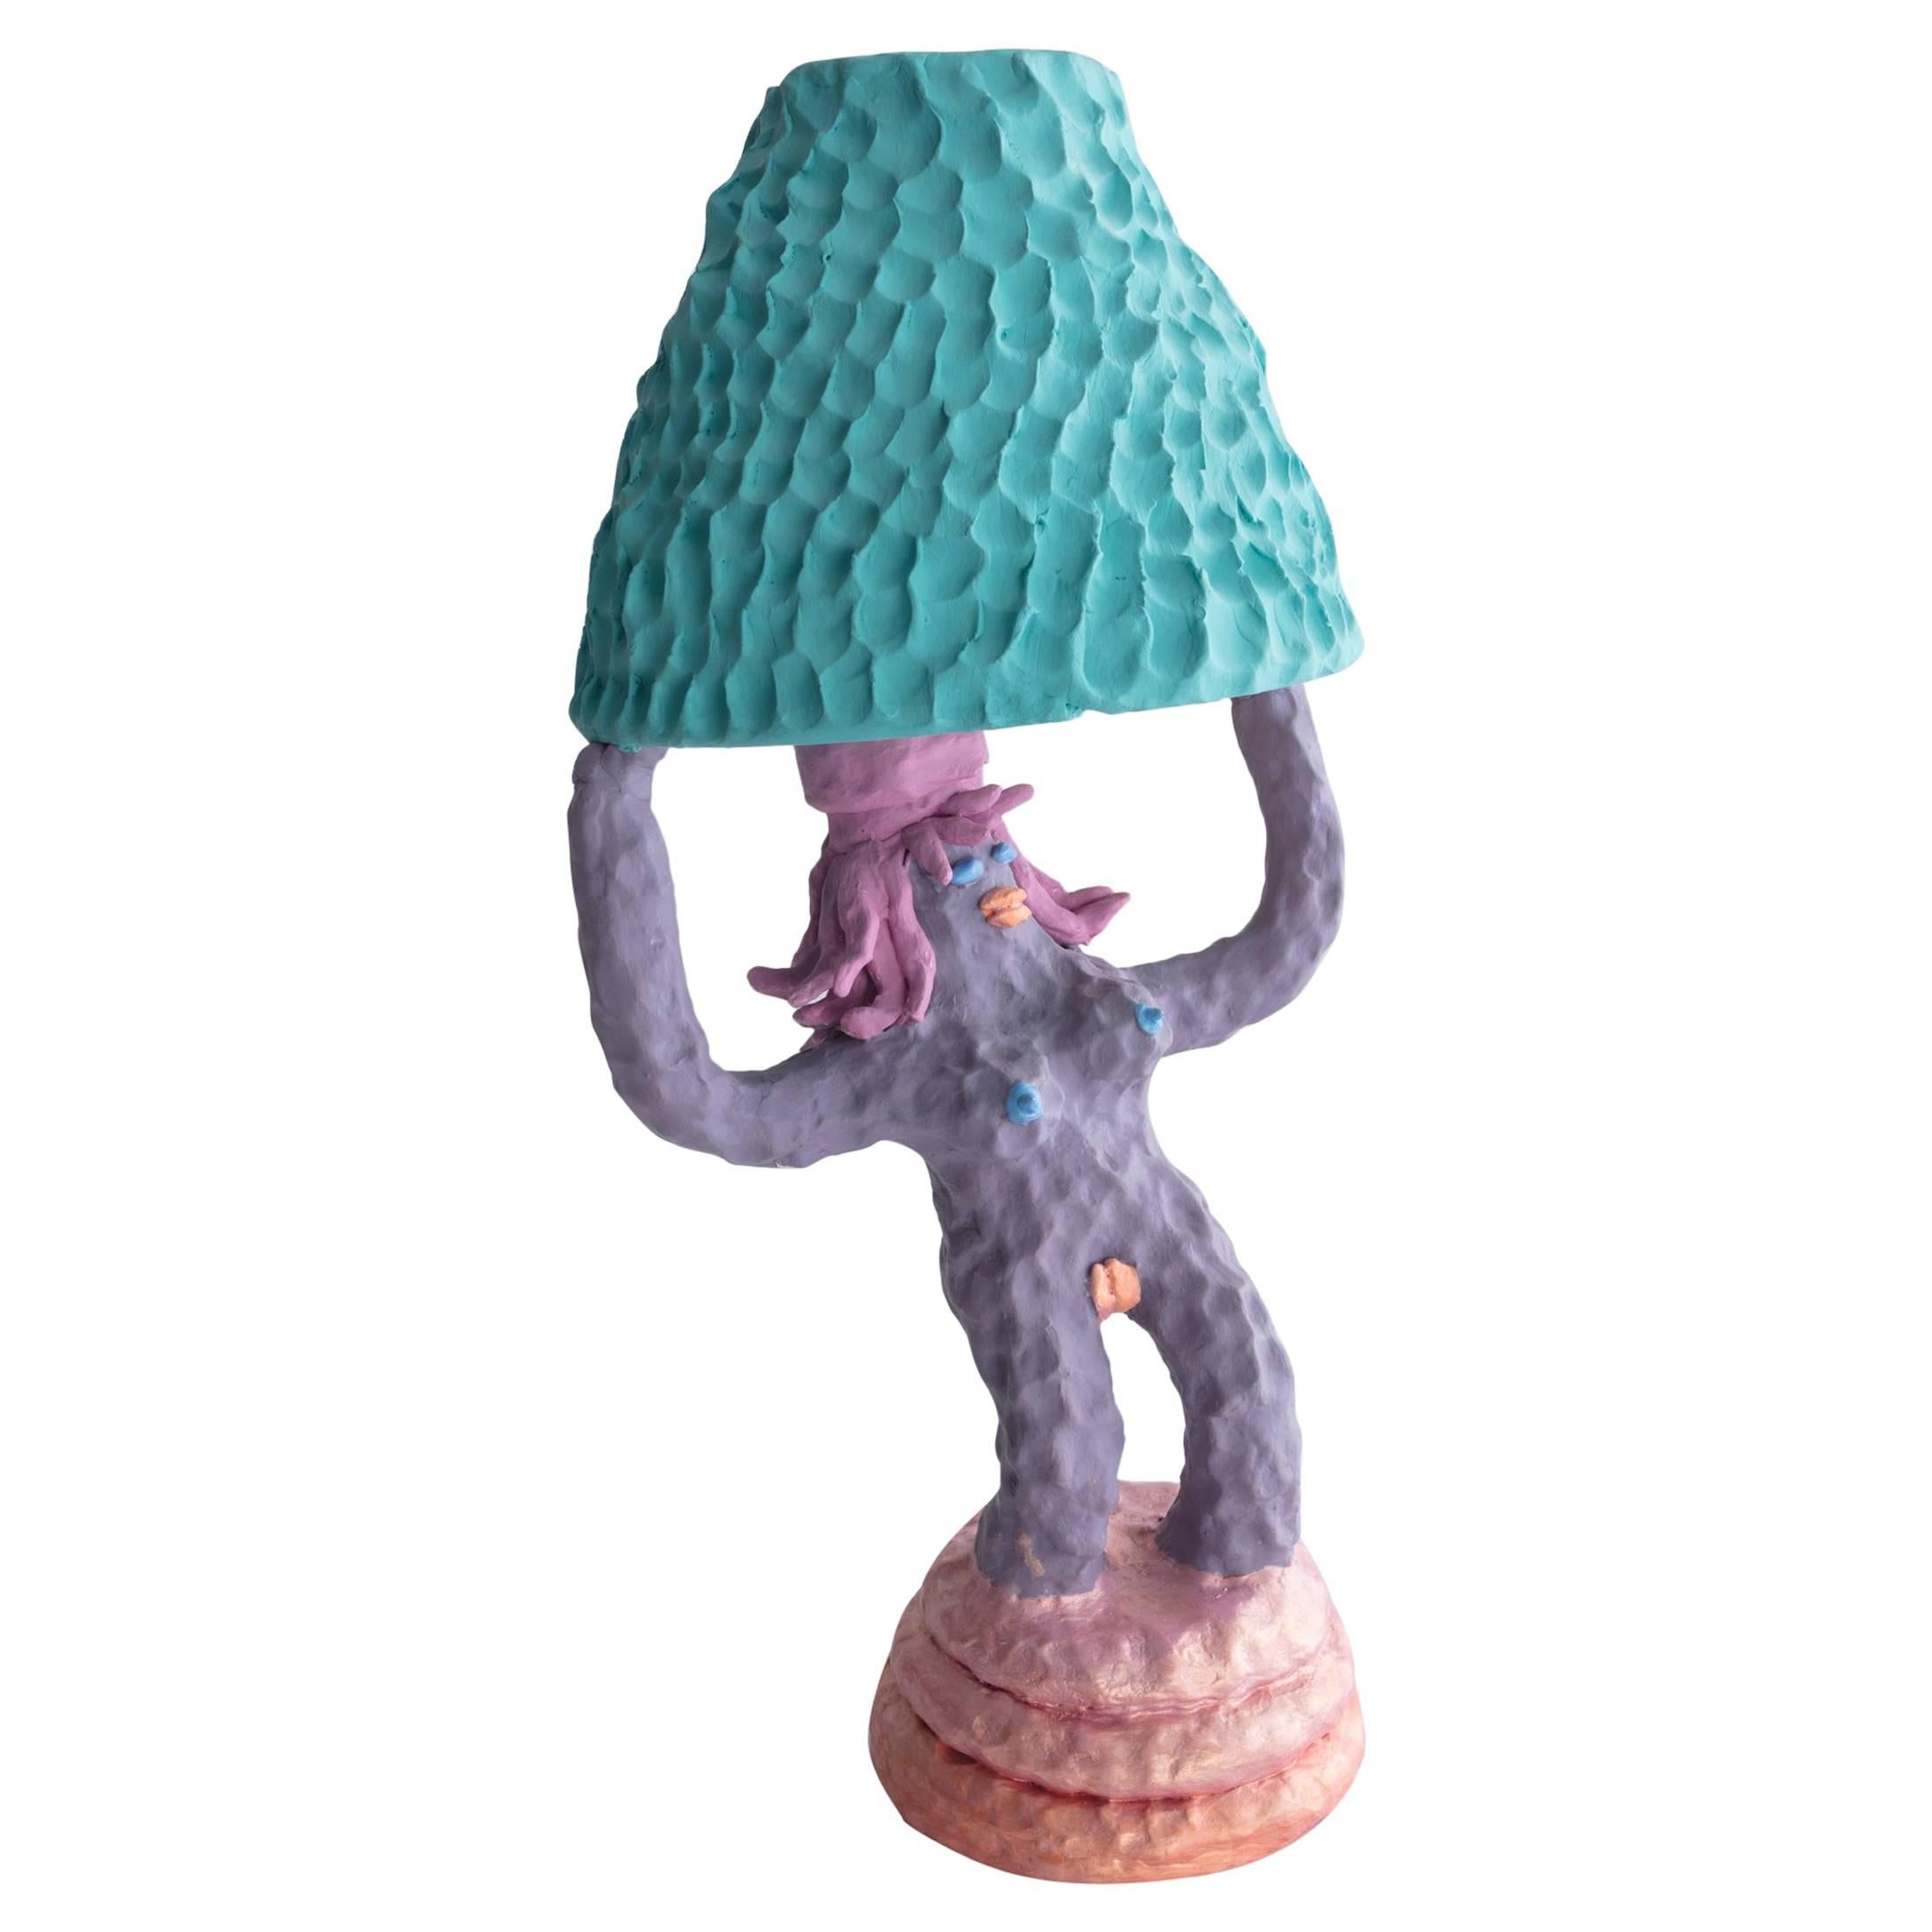 "Girl Lamp" in Ceramic by Katie Stout, USA, 2017.